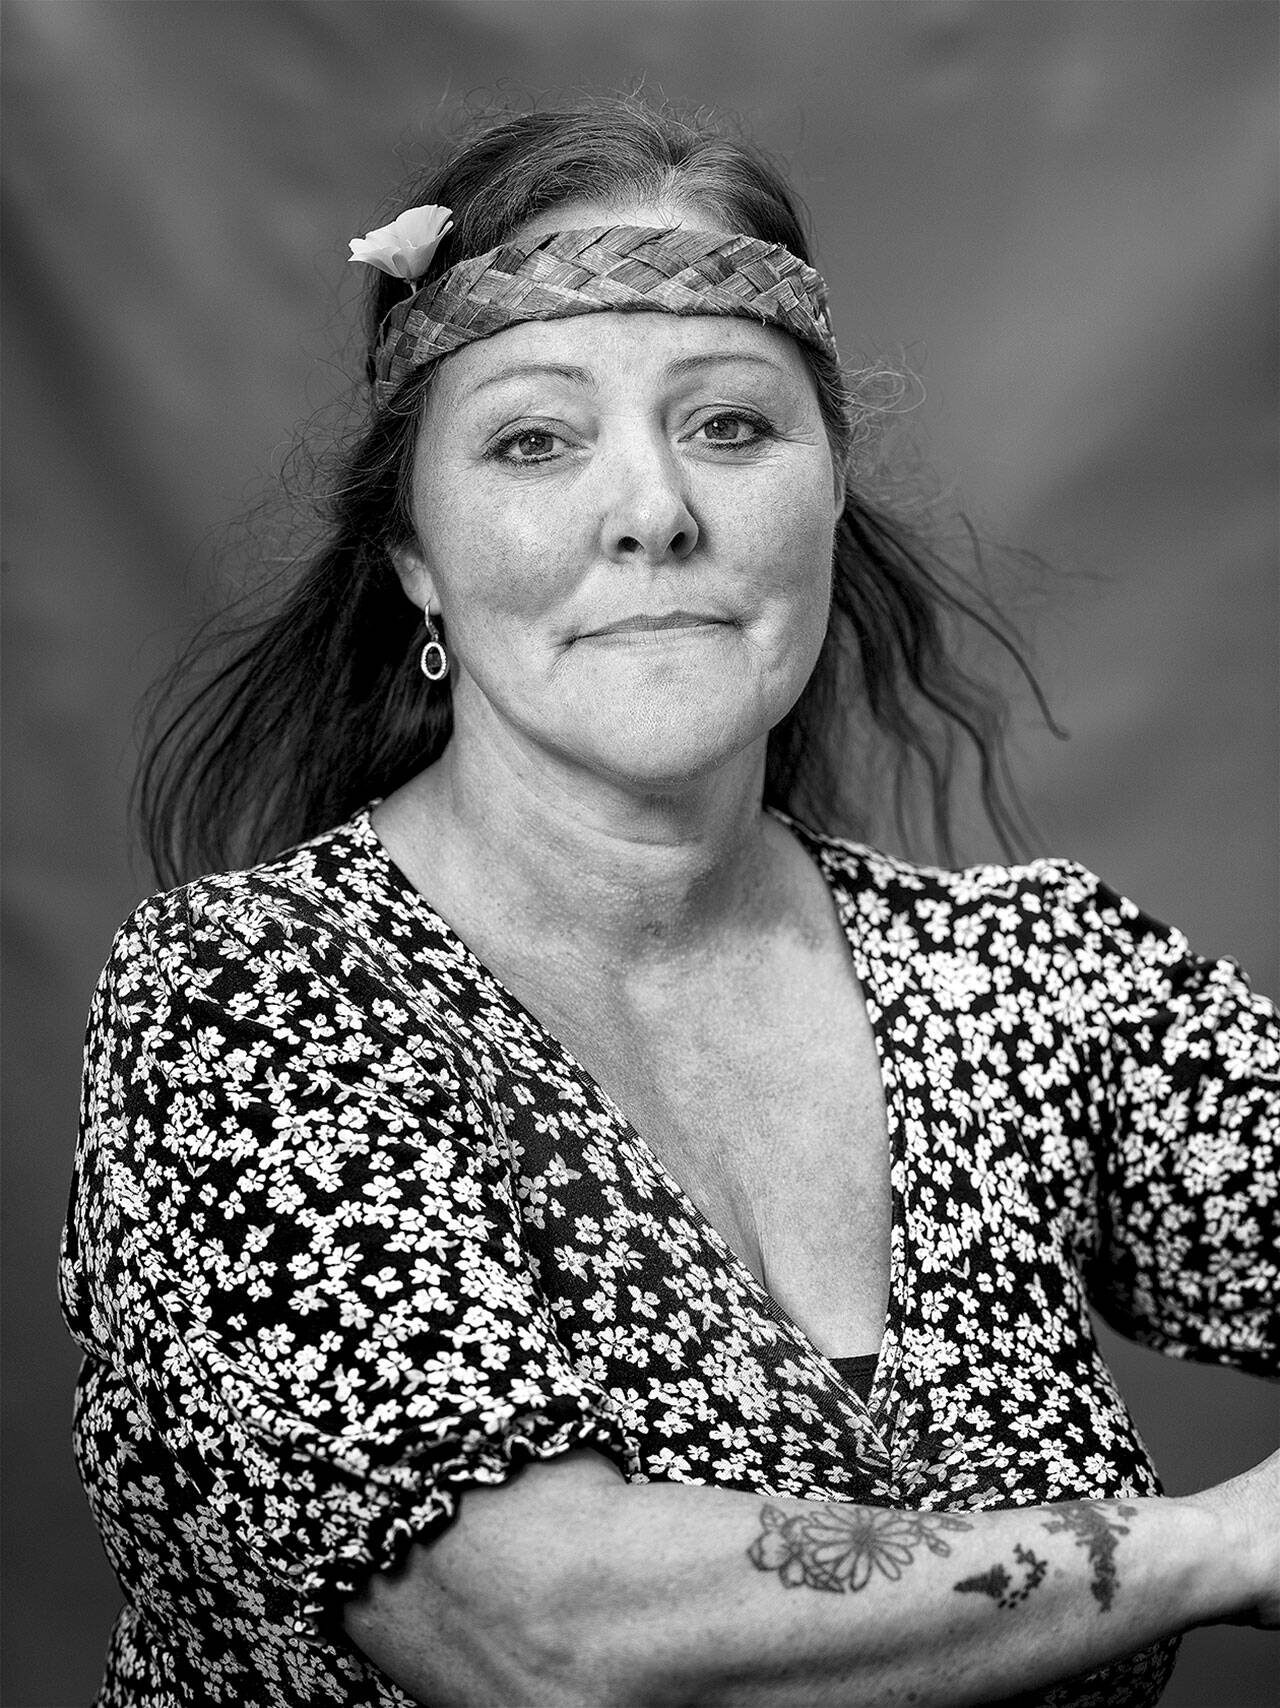 Julie Pomeroy’s portrait is among the photographs in “Still Here: Portraits of the Chemakum,” a large-scale exhibit at Chimacum School. The public opening will be held Thursday afternoon. (Photo copyright Brian Goodman)